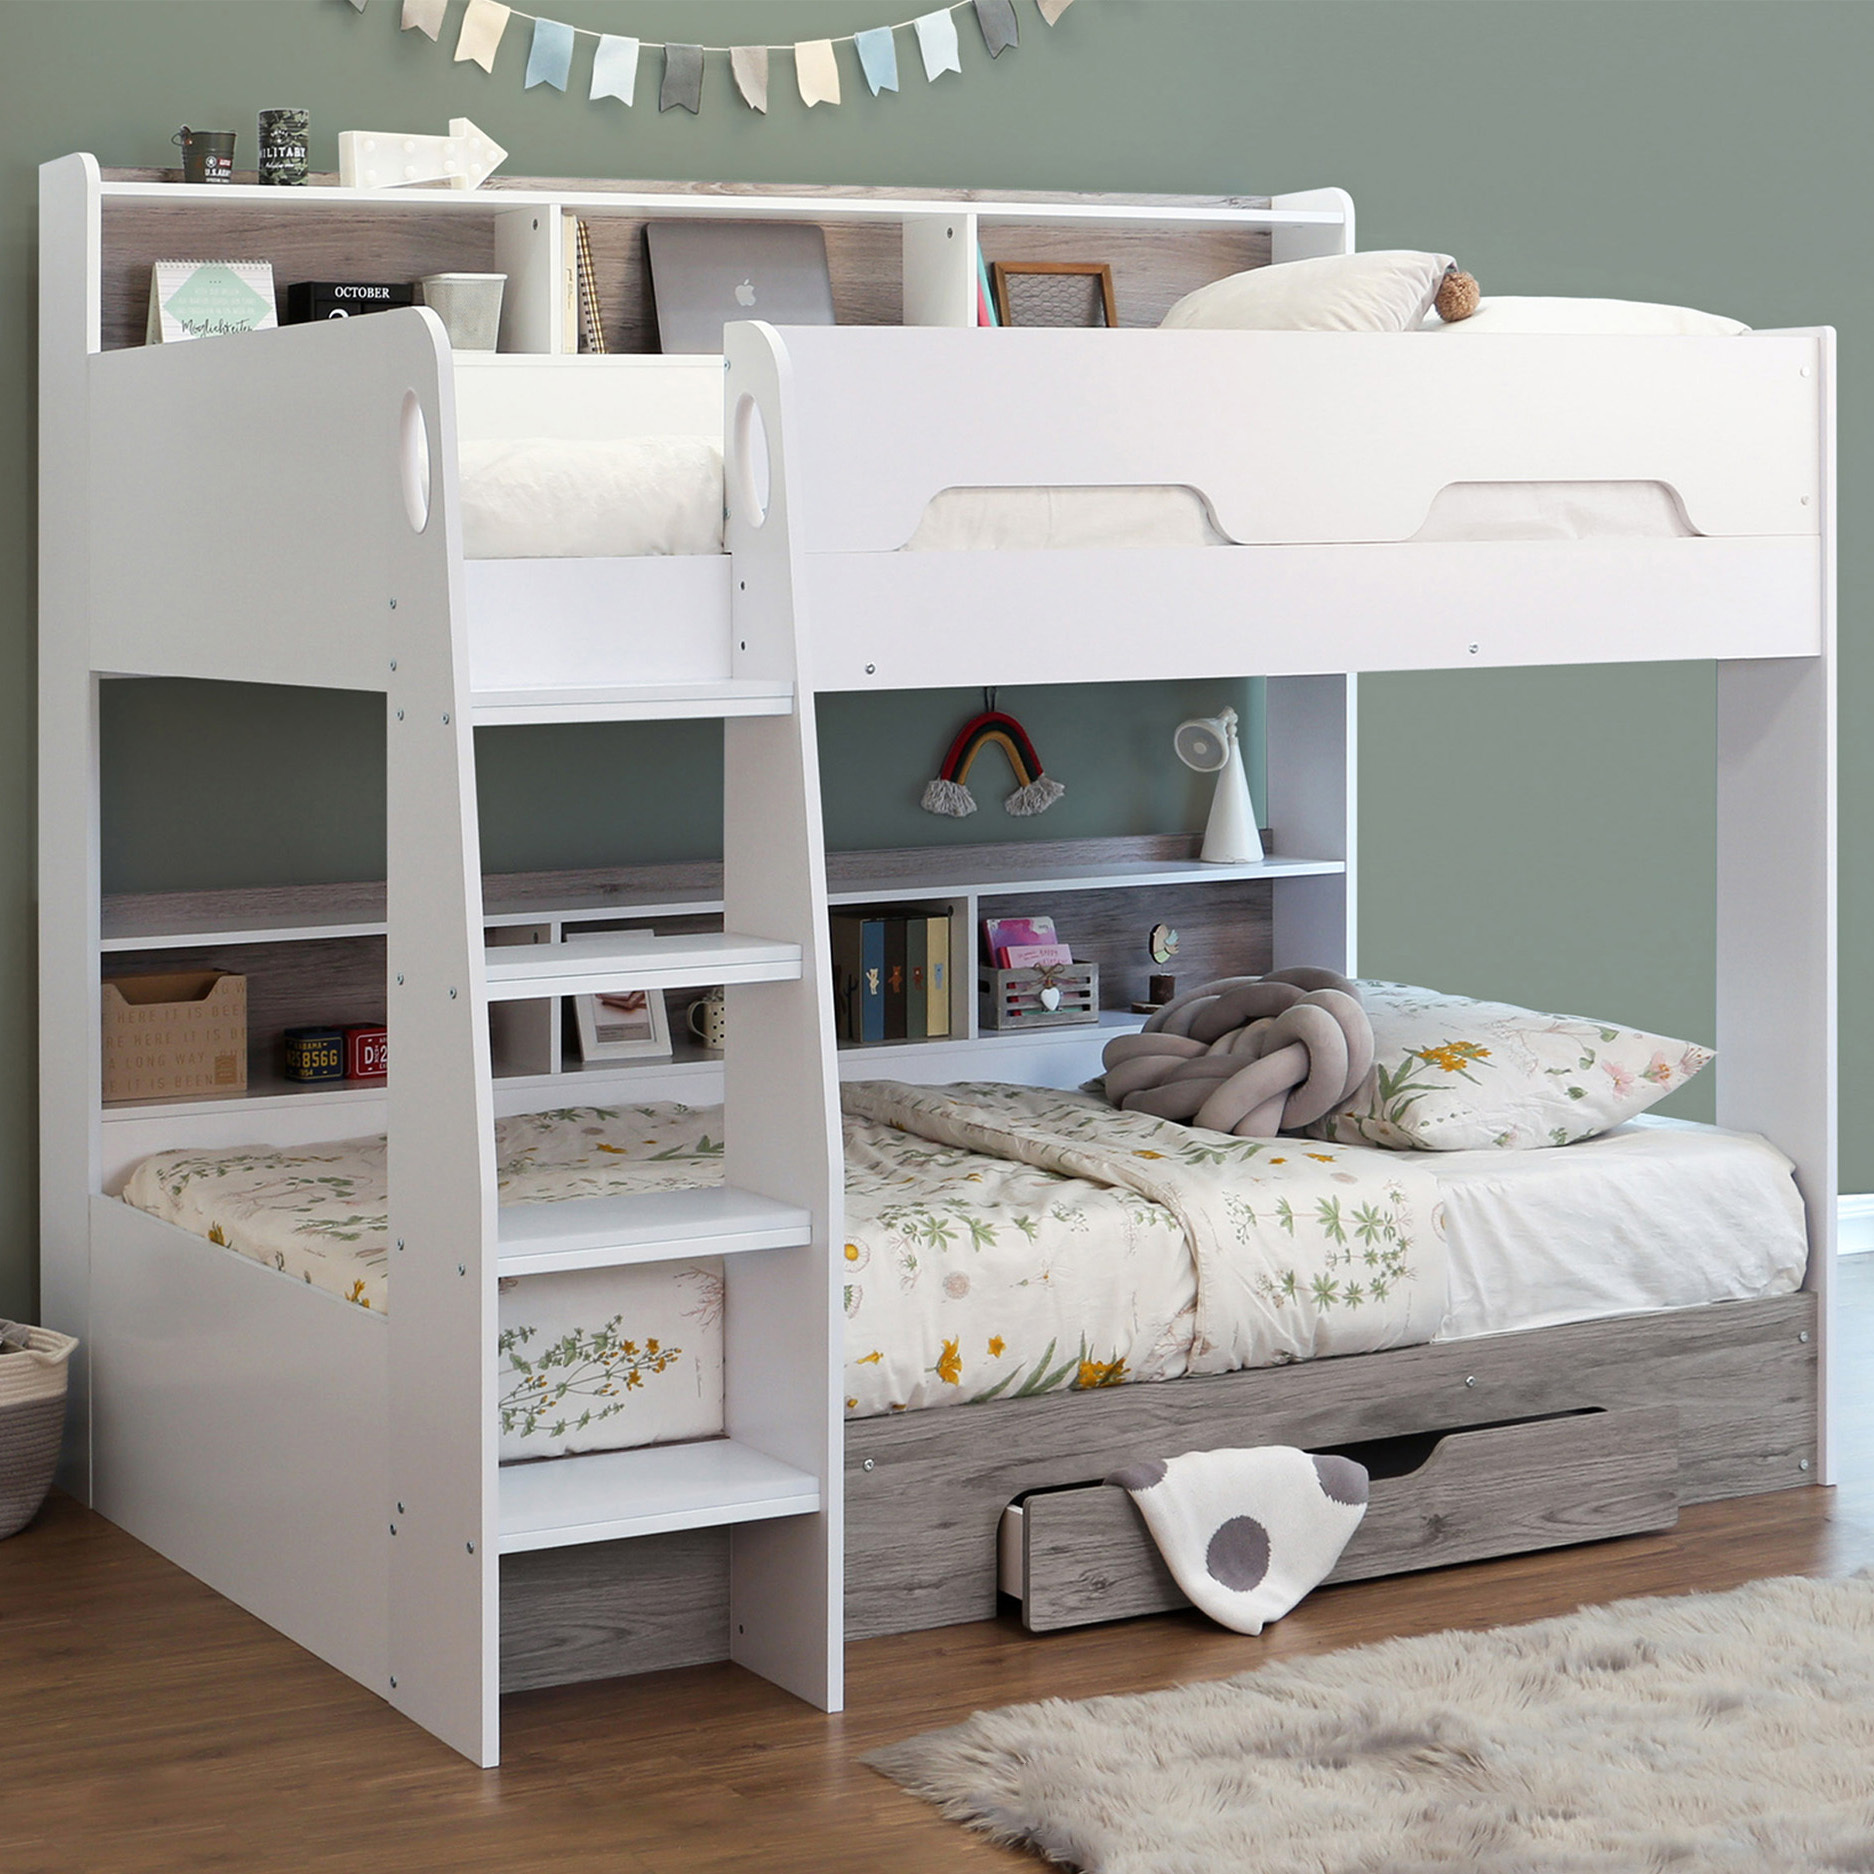 Vic Furniture Castel Single Bunk Bed, Wooden Bunk Beds With Shelves